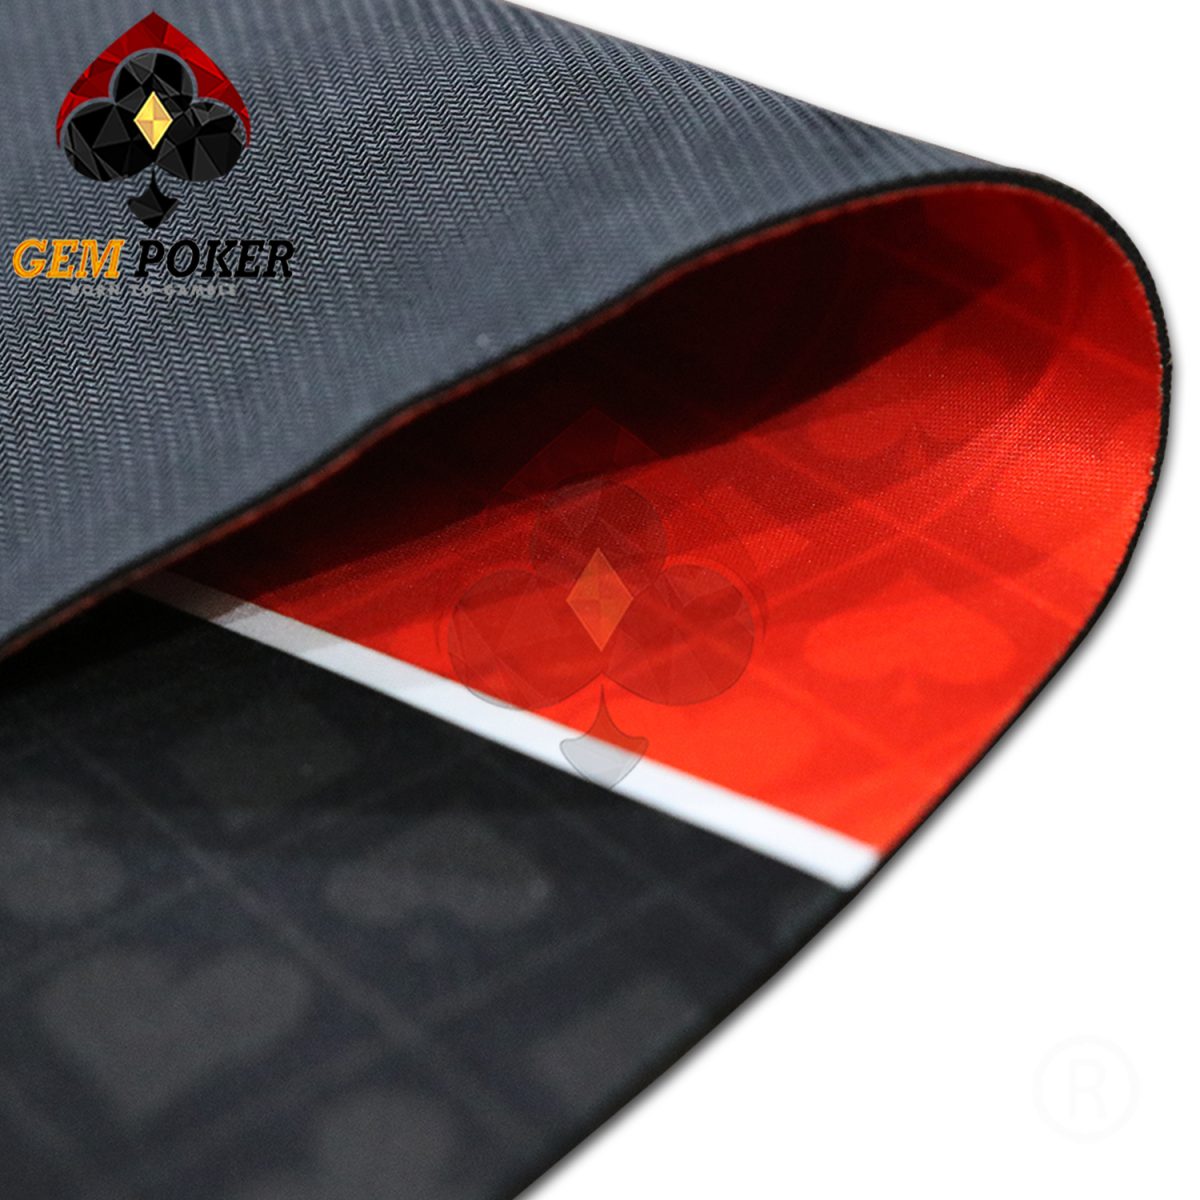 ROUND TEXAS POKER MAT RUBBER RED